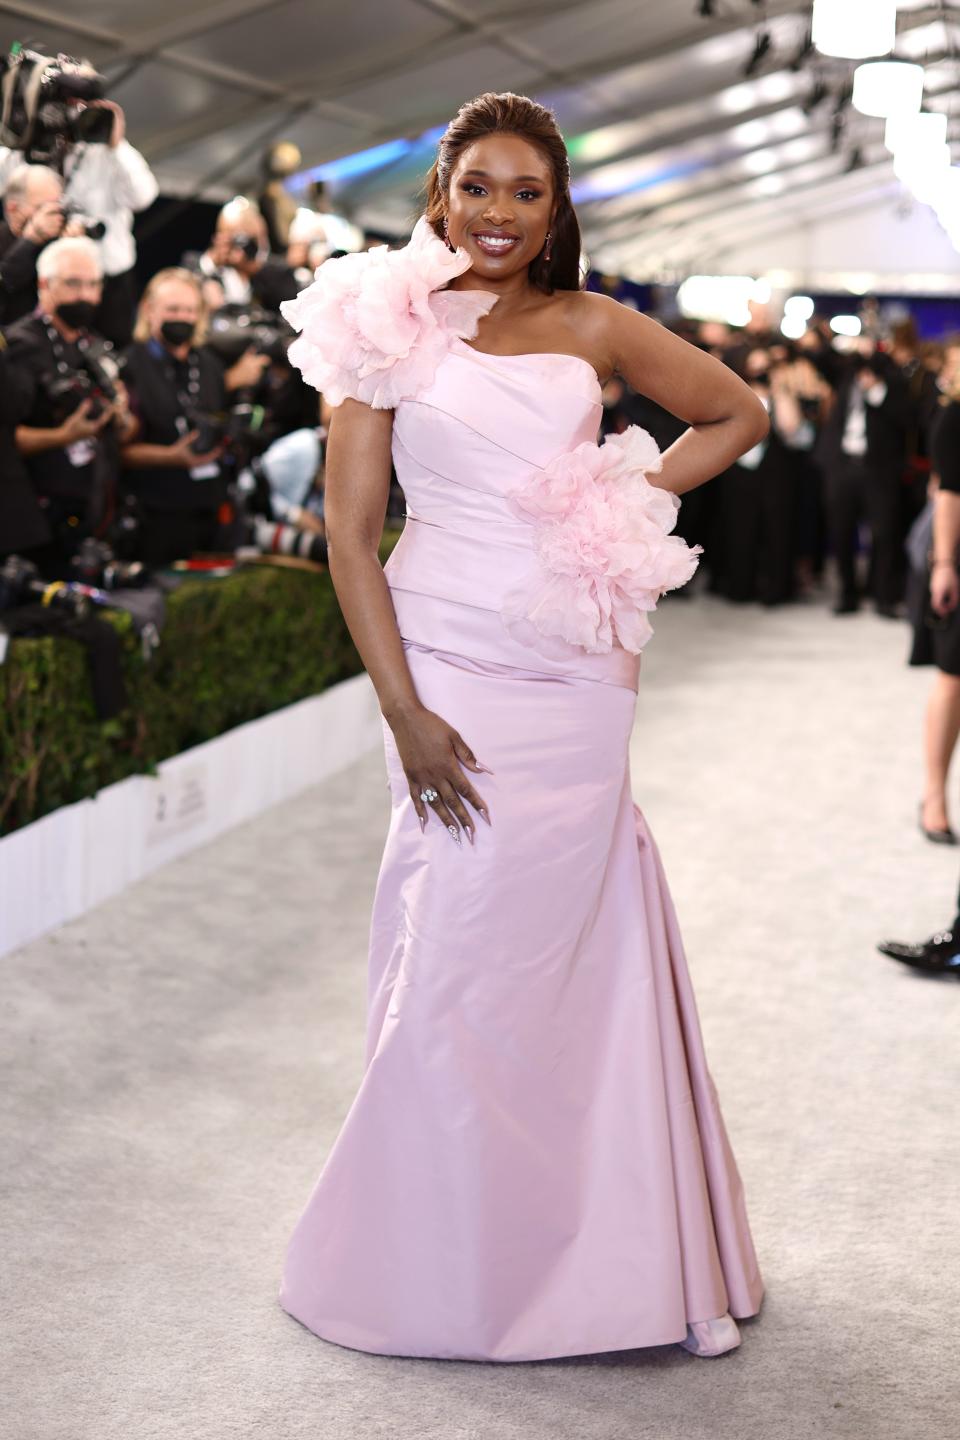 Jennifer in a light pink mermaid style dress with one shoulder with voluminous flowers.